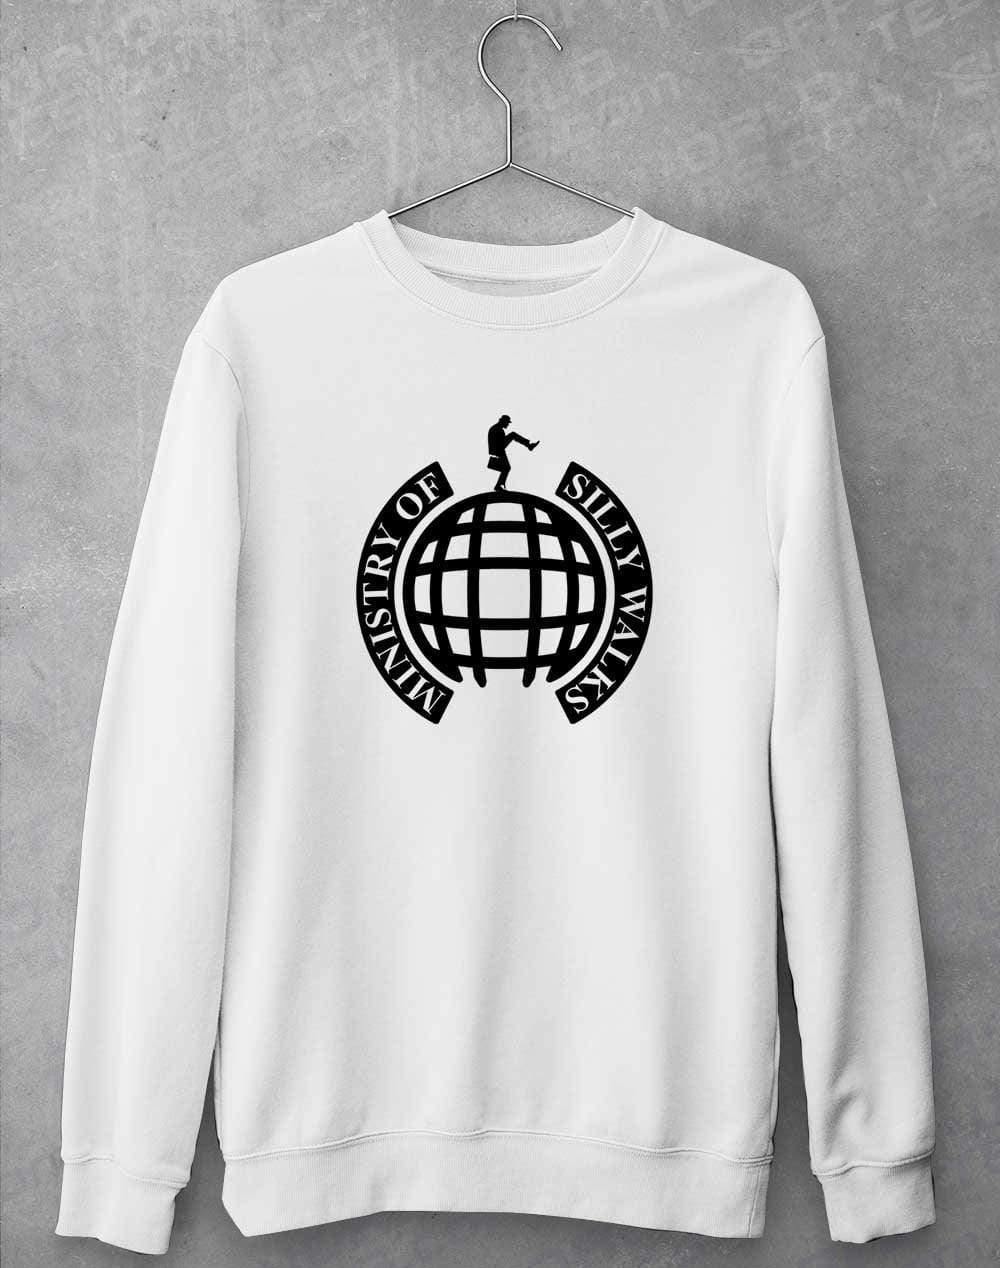 Ministry of Silly Walks Sweatshirt S / Arctic White  - Off World Tees